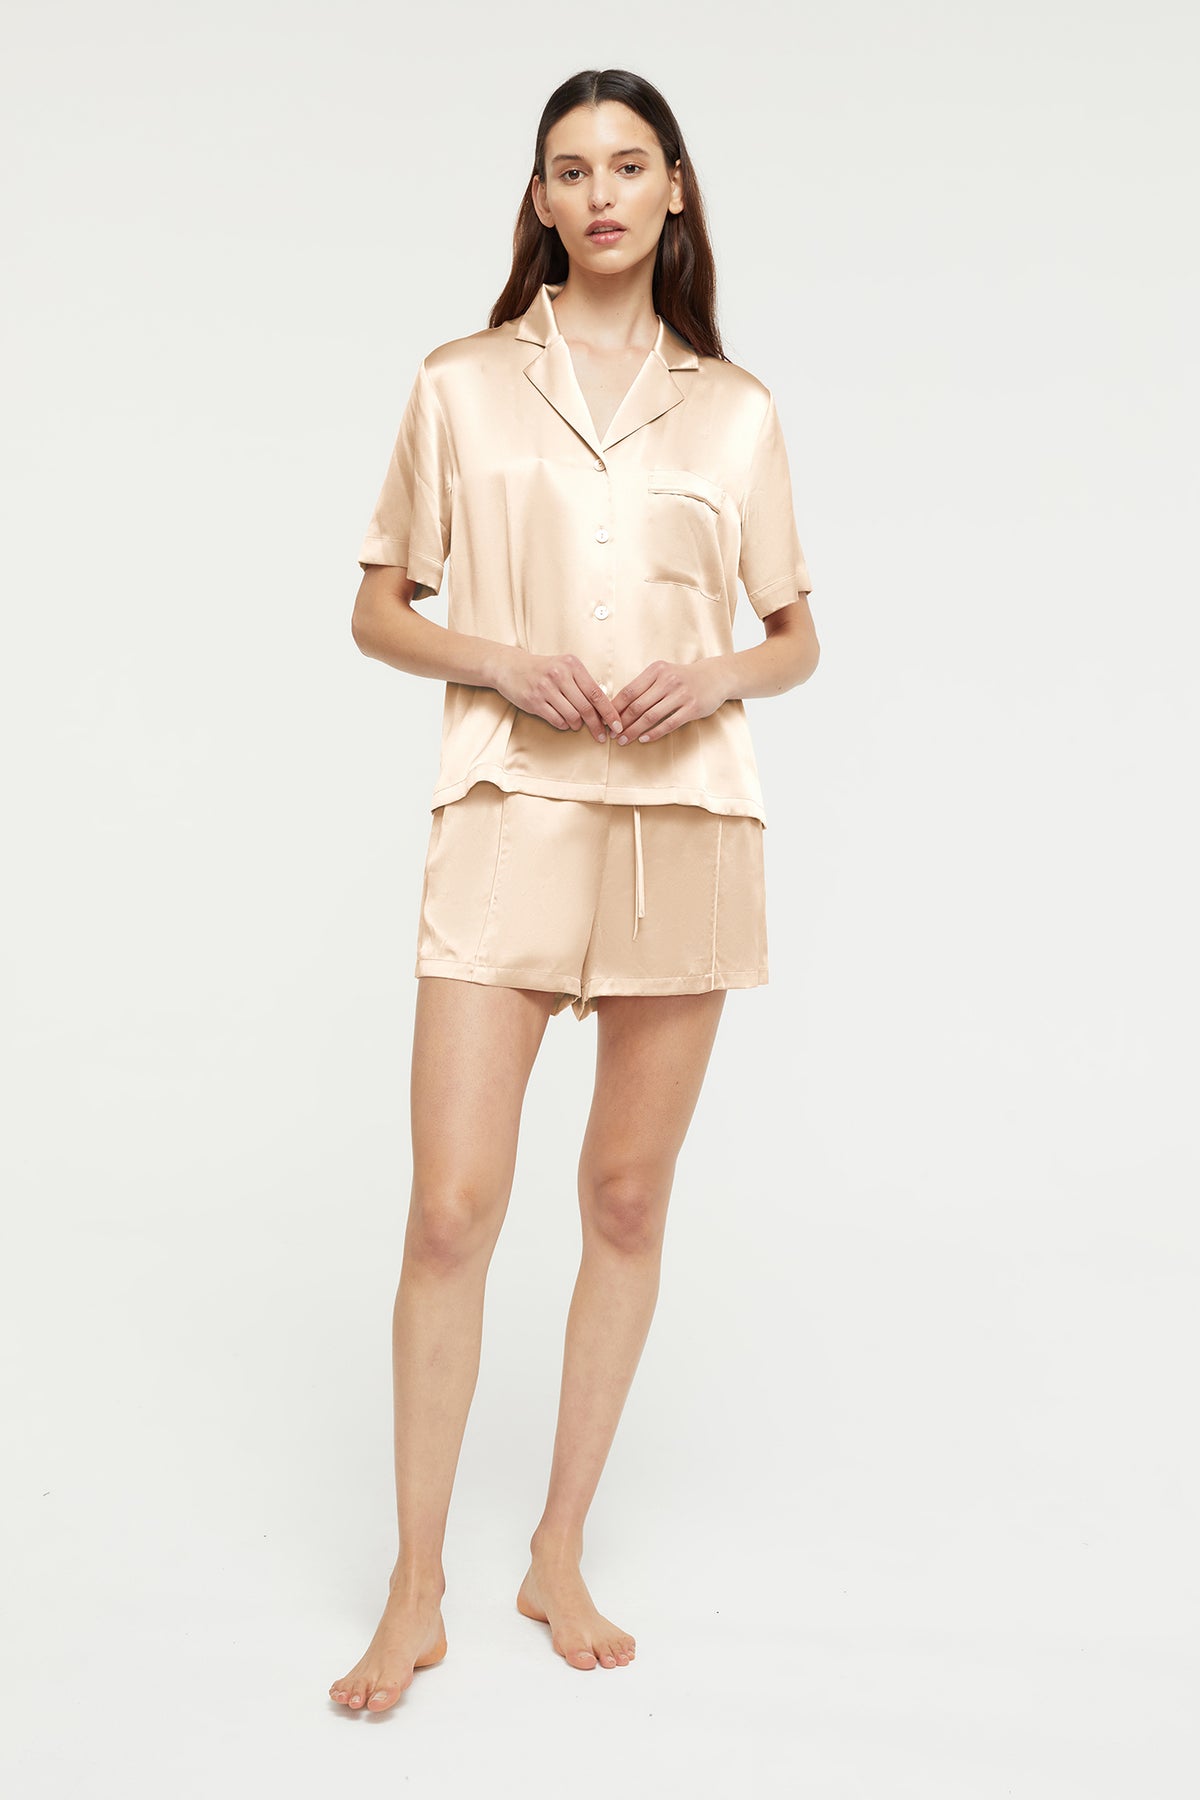 The Fine Finishes Short Pyjama By GINIA In Mink